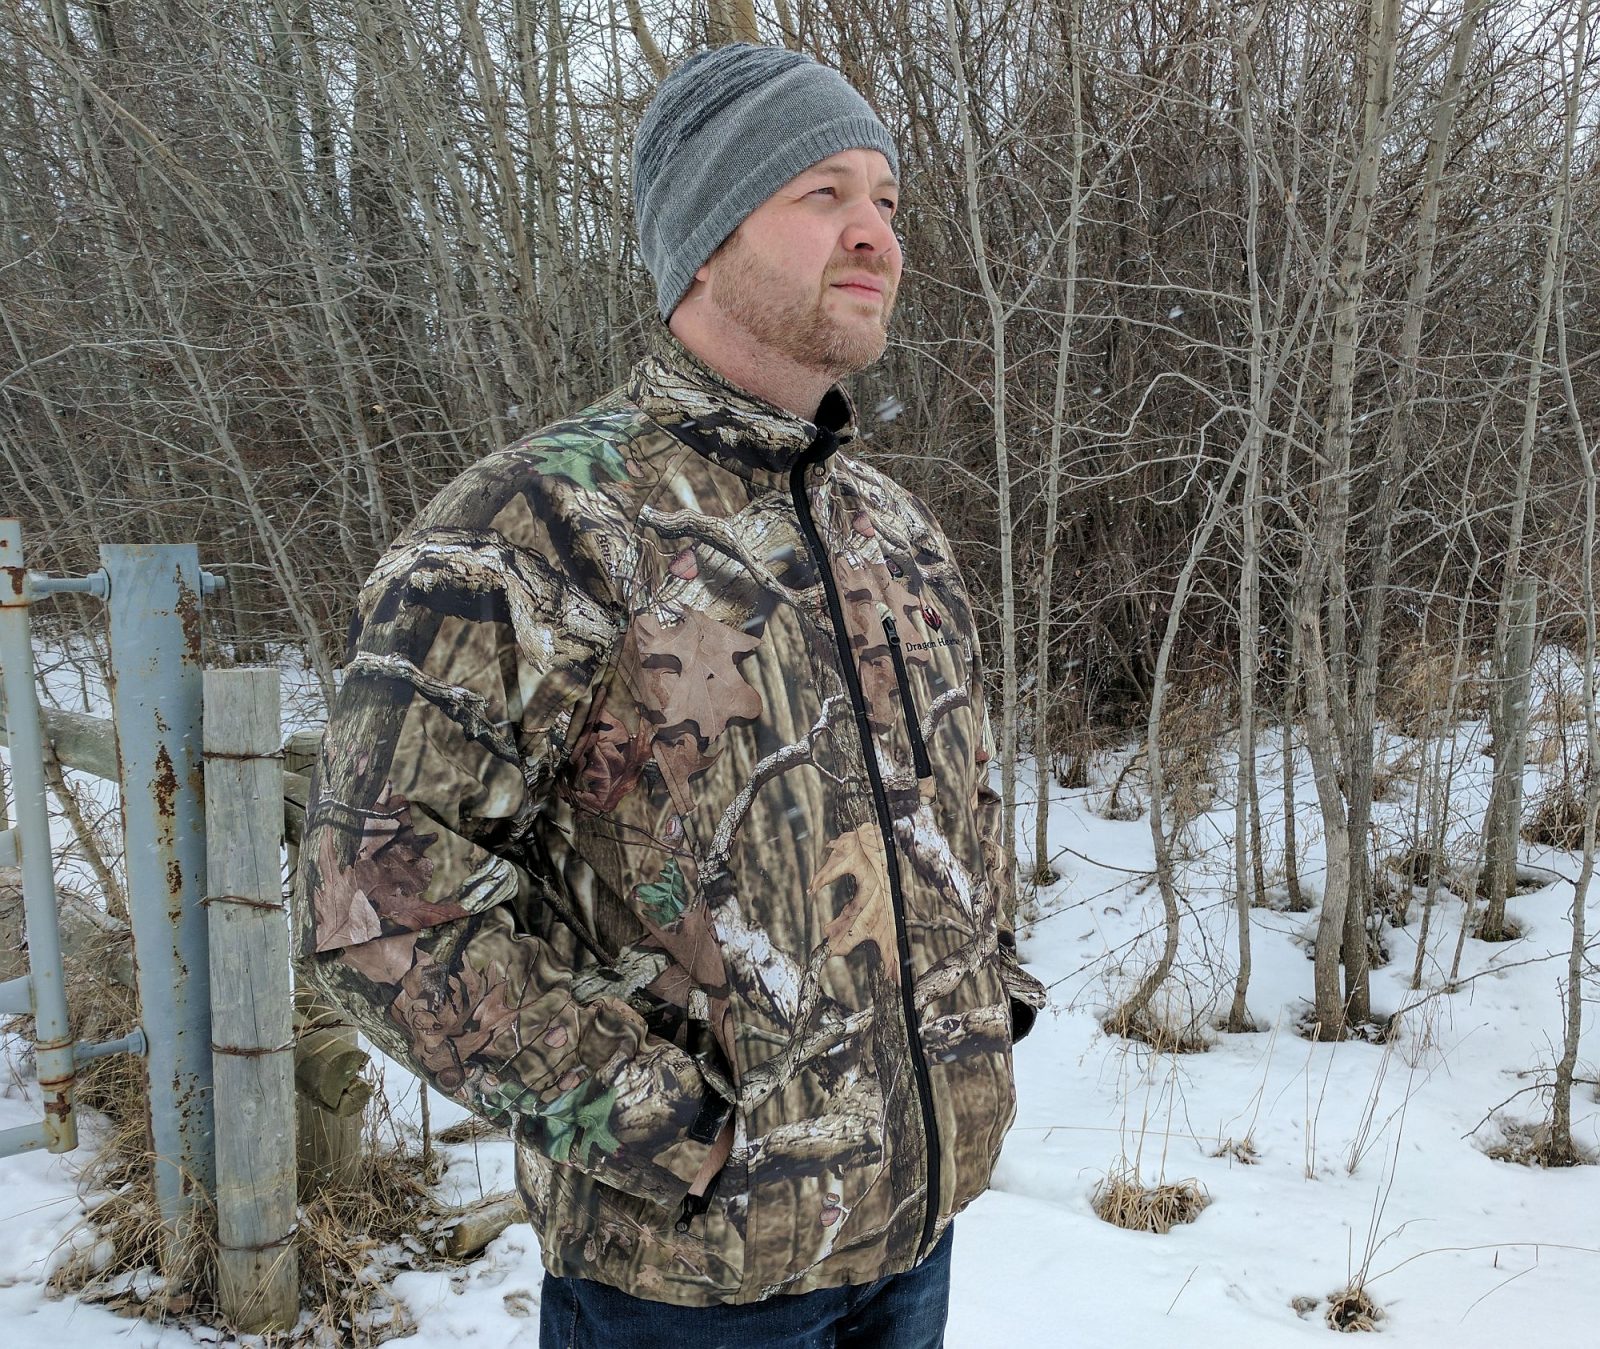 Wyvern Heated Jacket Review | The Hunting Gear Guy